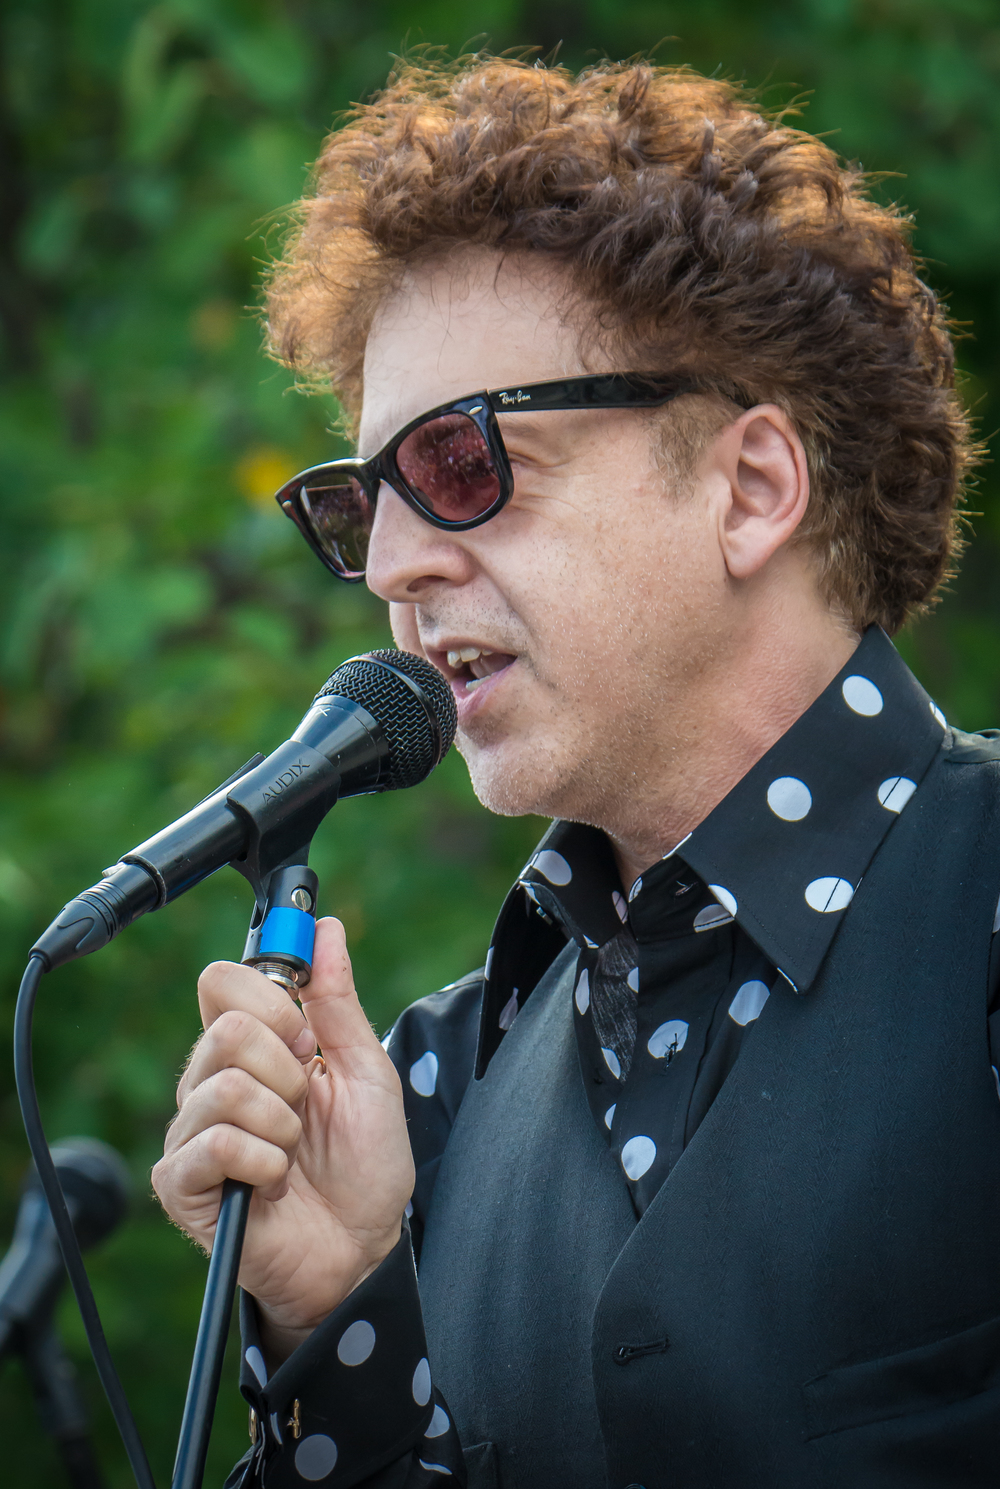  Magic Marc / Salute to the Music of Bob Dylan / The Veterans' Memorial Wolfe Park Amphitheater / St. Louis Park, Minnesota / August 9th, 2014 / Photo by Don Olson 